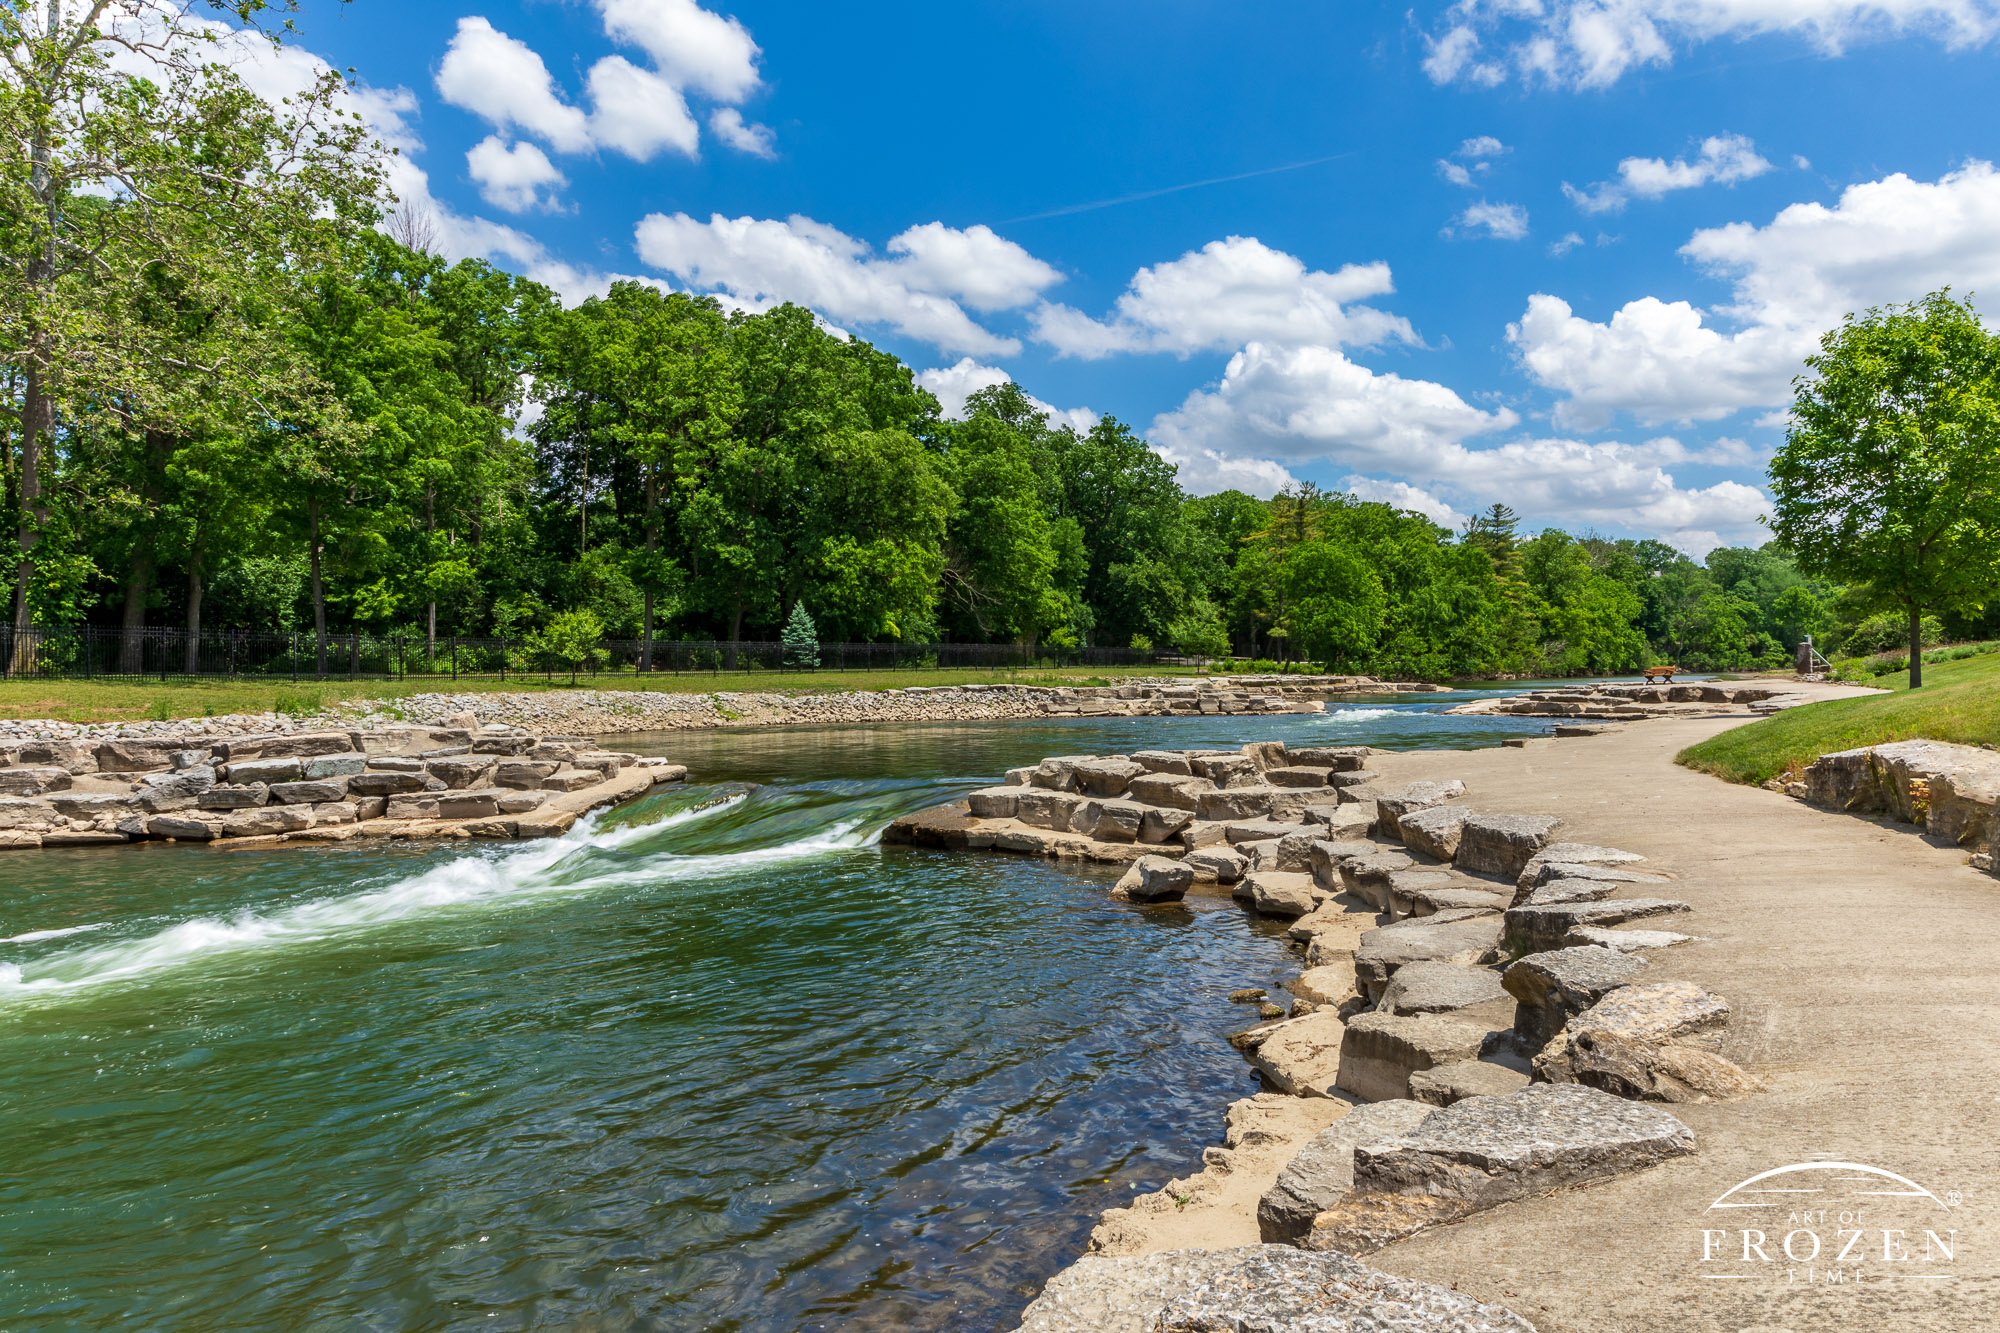 A whitewater play area in downtown Springfield Ohio where Buck Creek flows by under blue skies and cumulus clouds